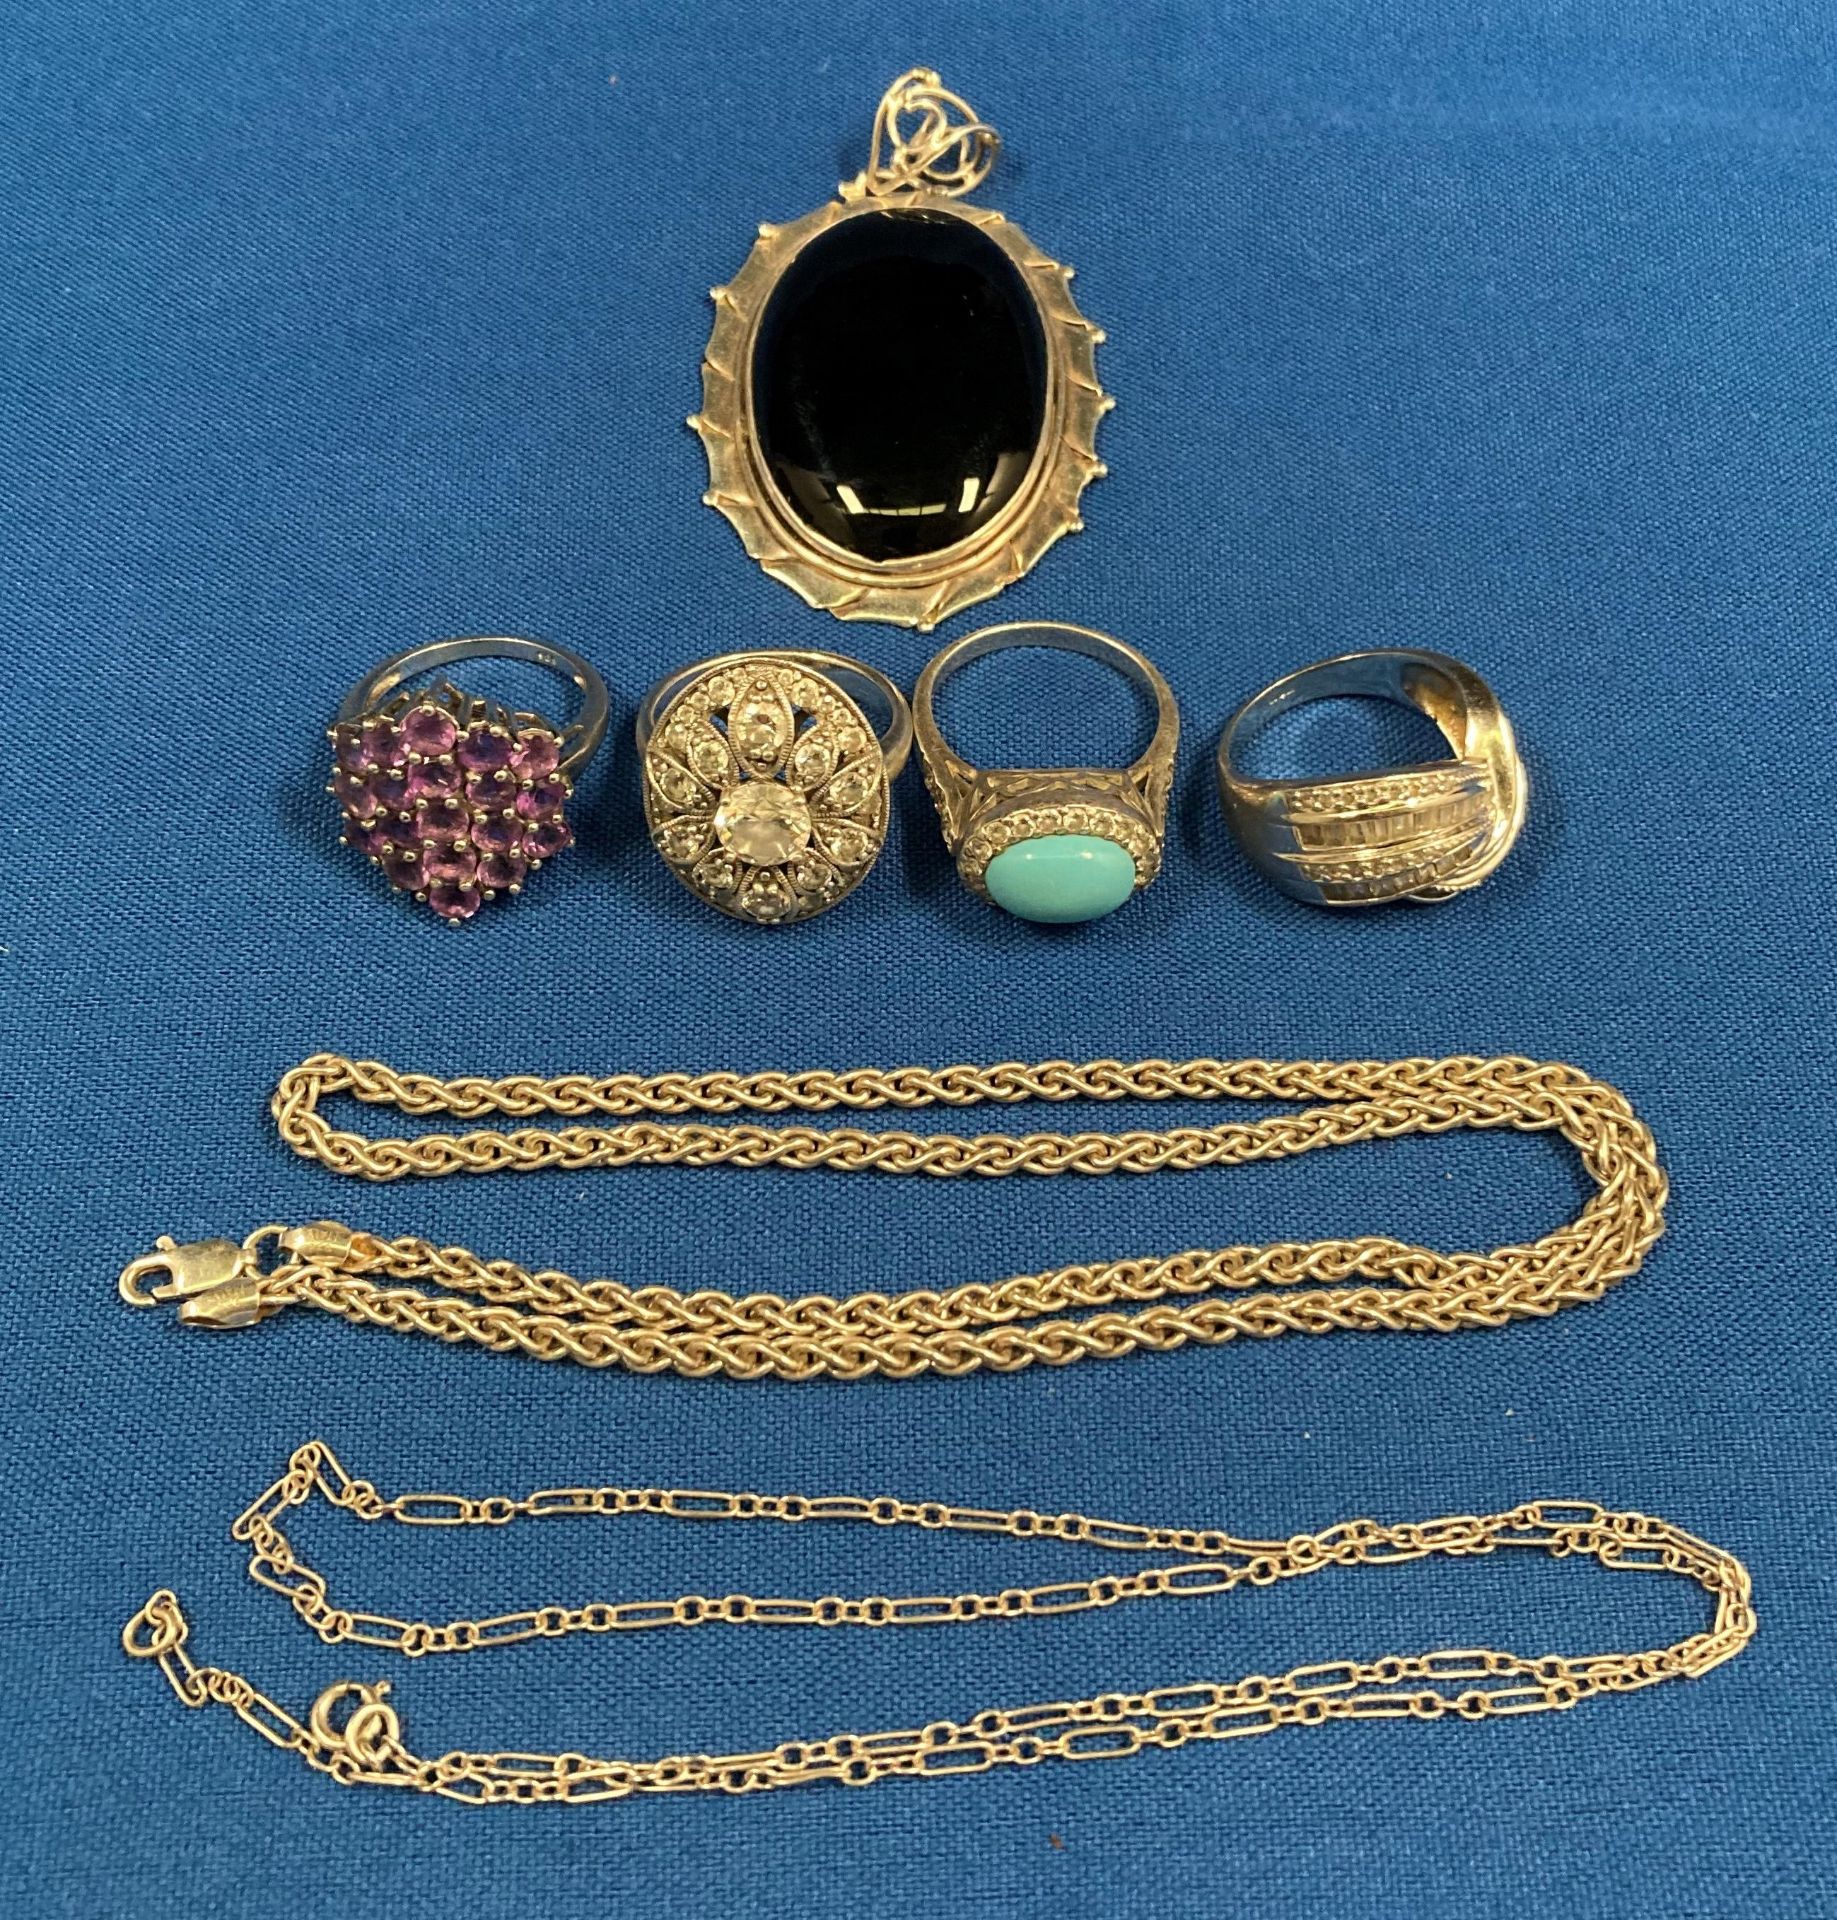 Contents to bag - assorted silver hallmarked jewellery including four rings,